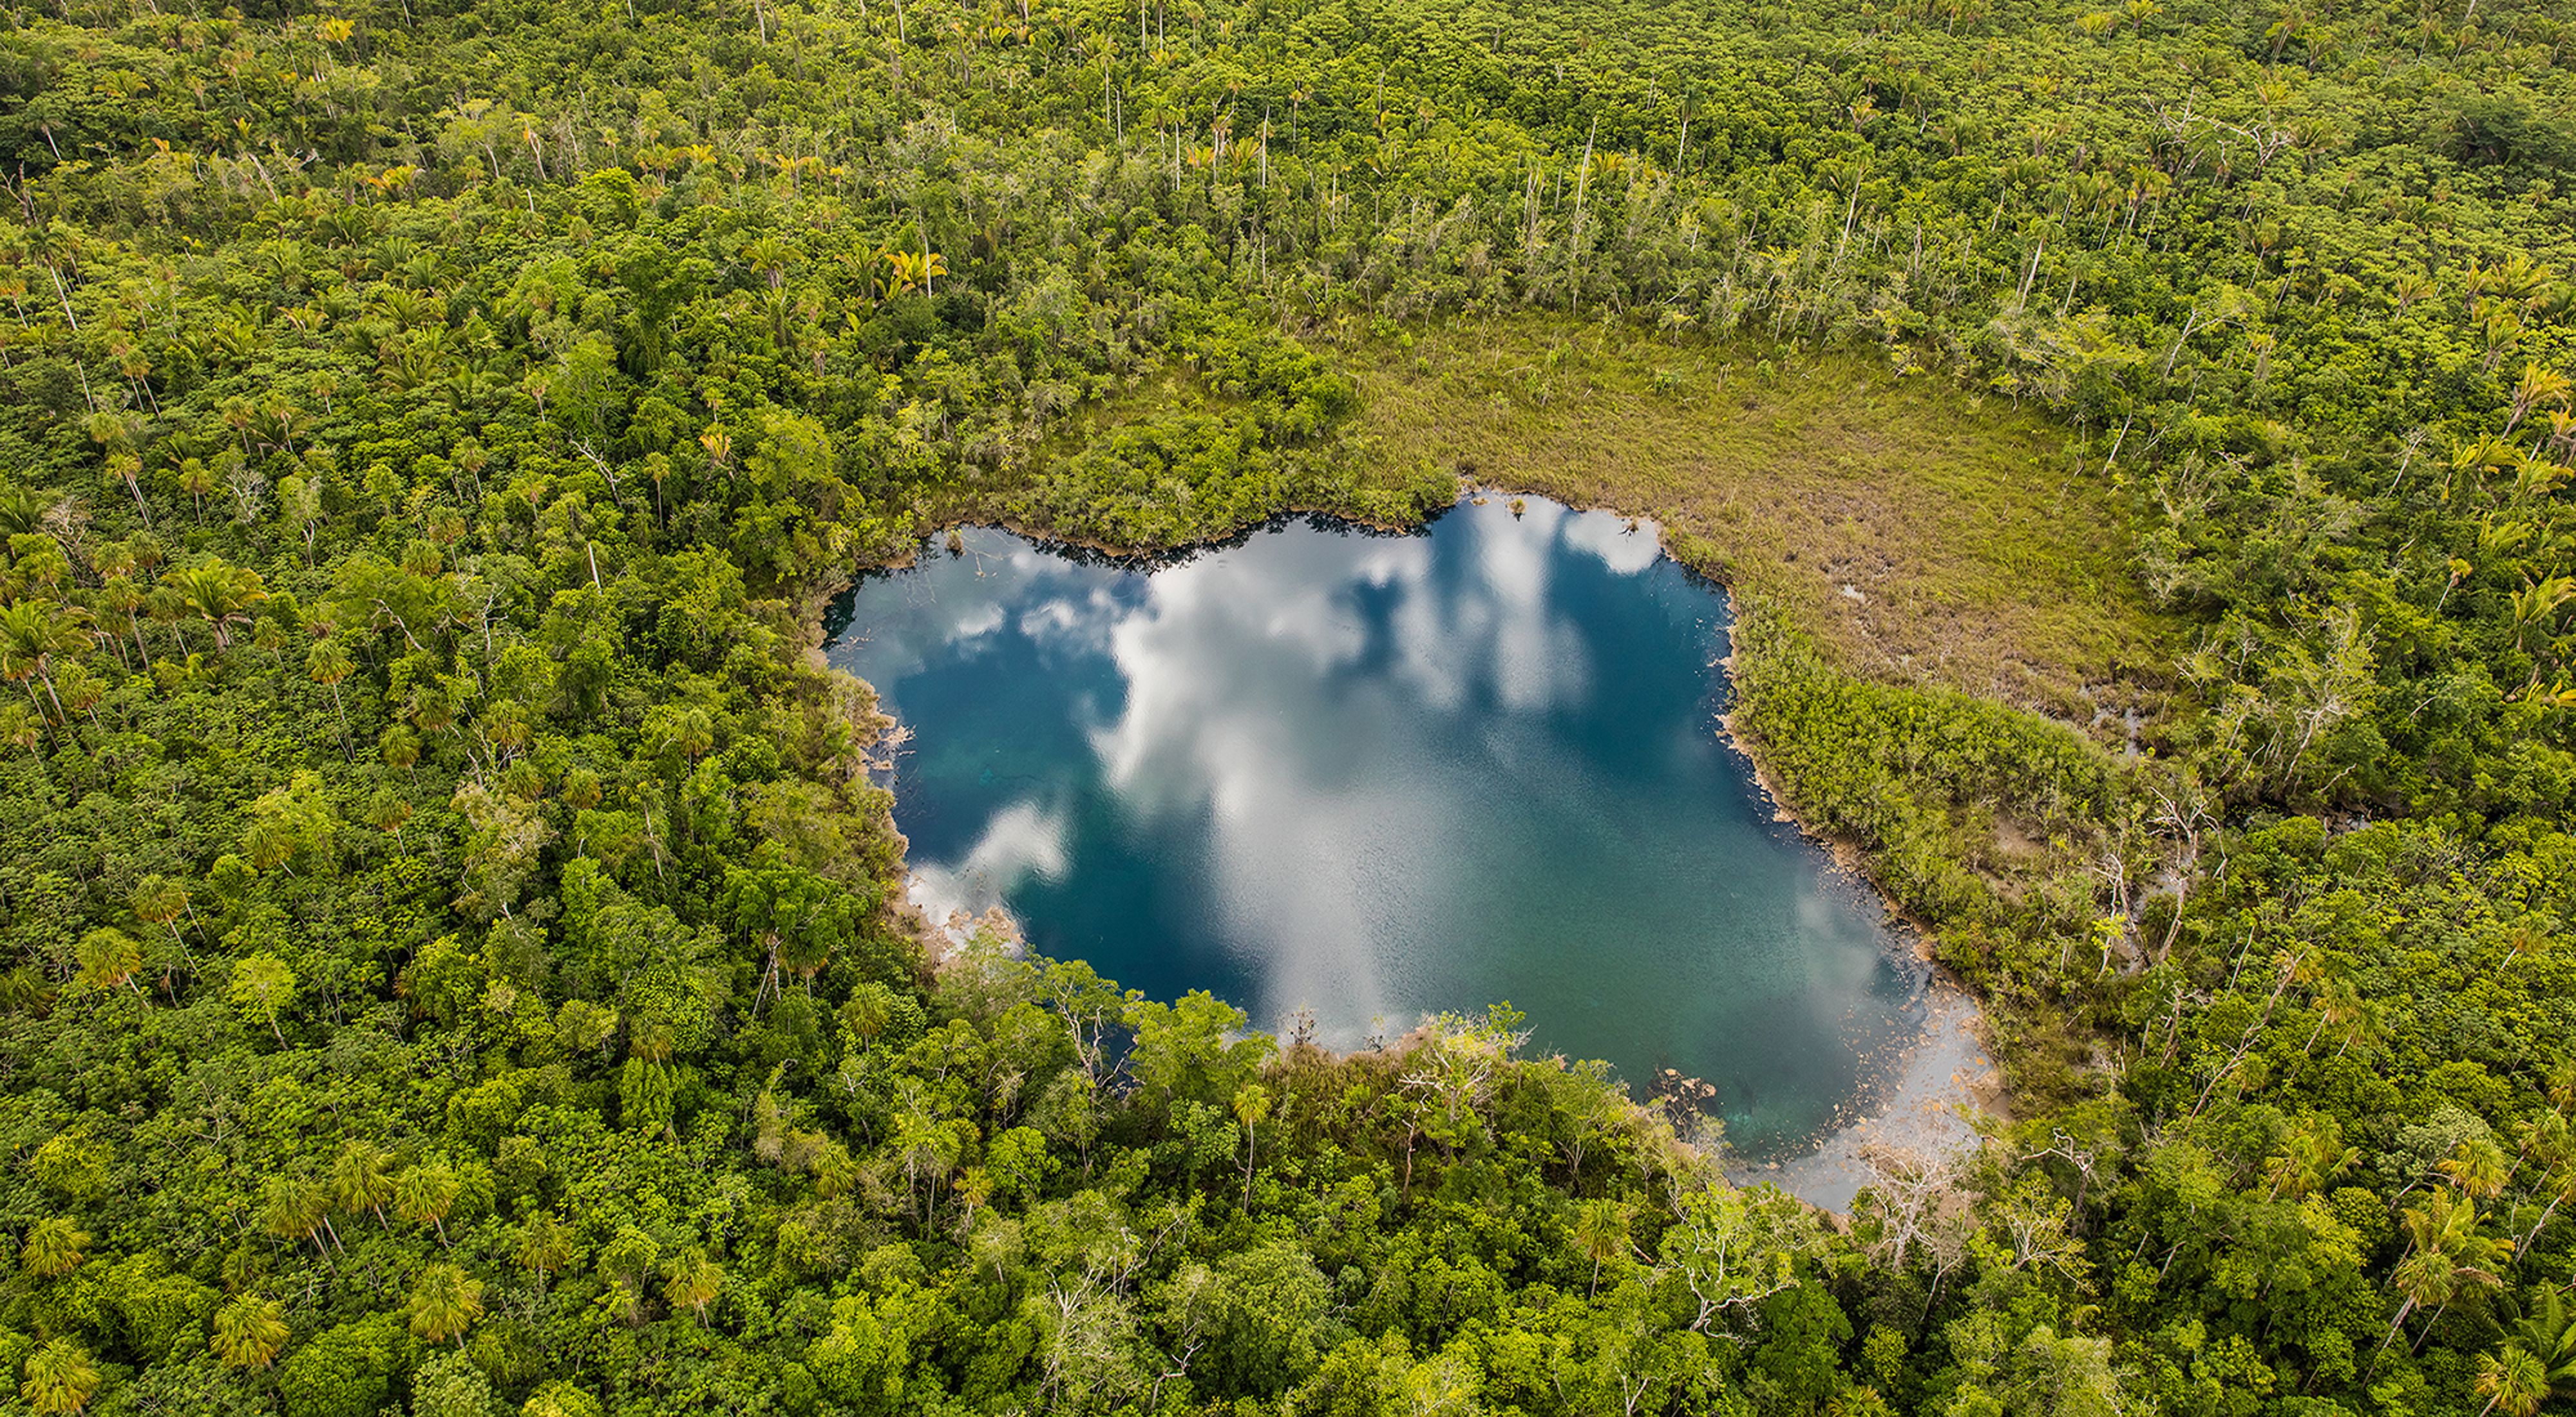 An aerial view of tropical forest and a blue water pool reflected the cloudy sky